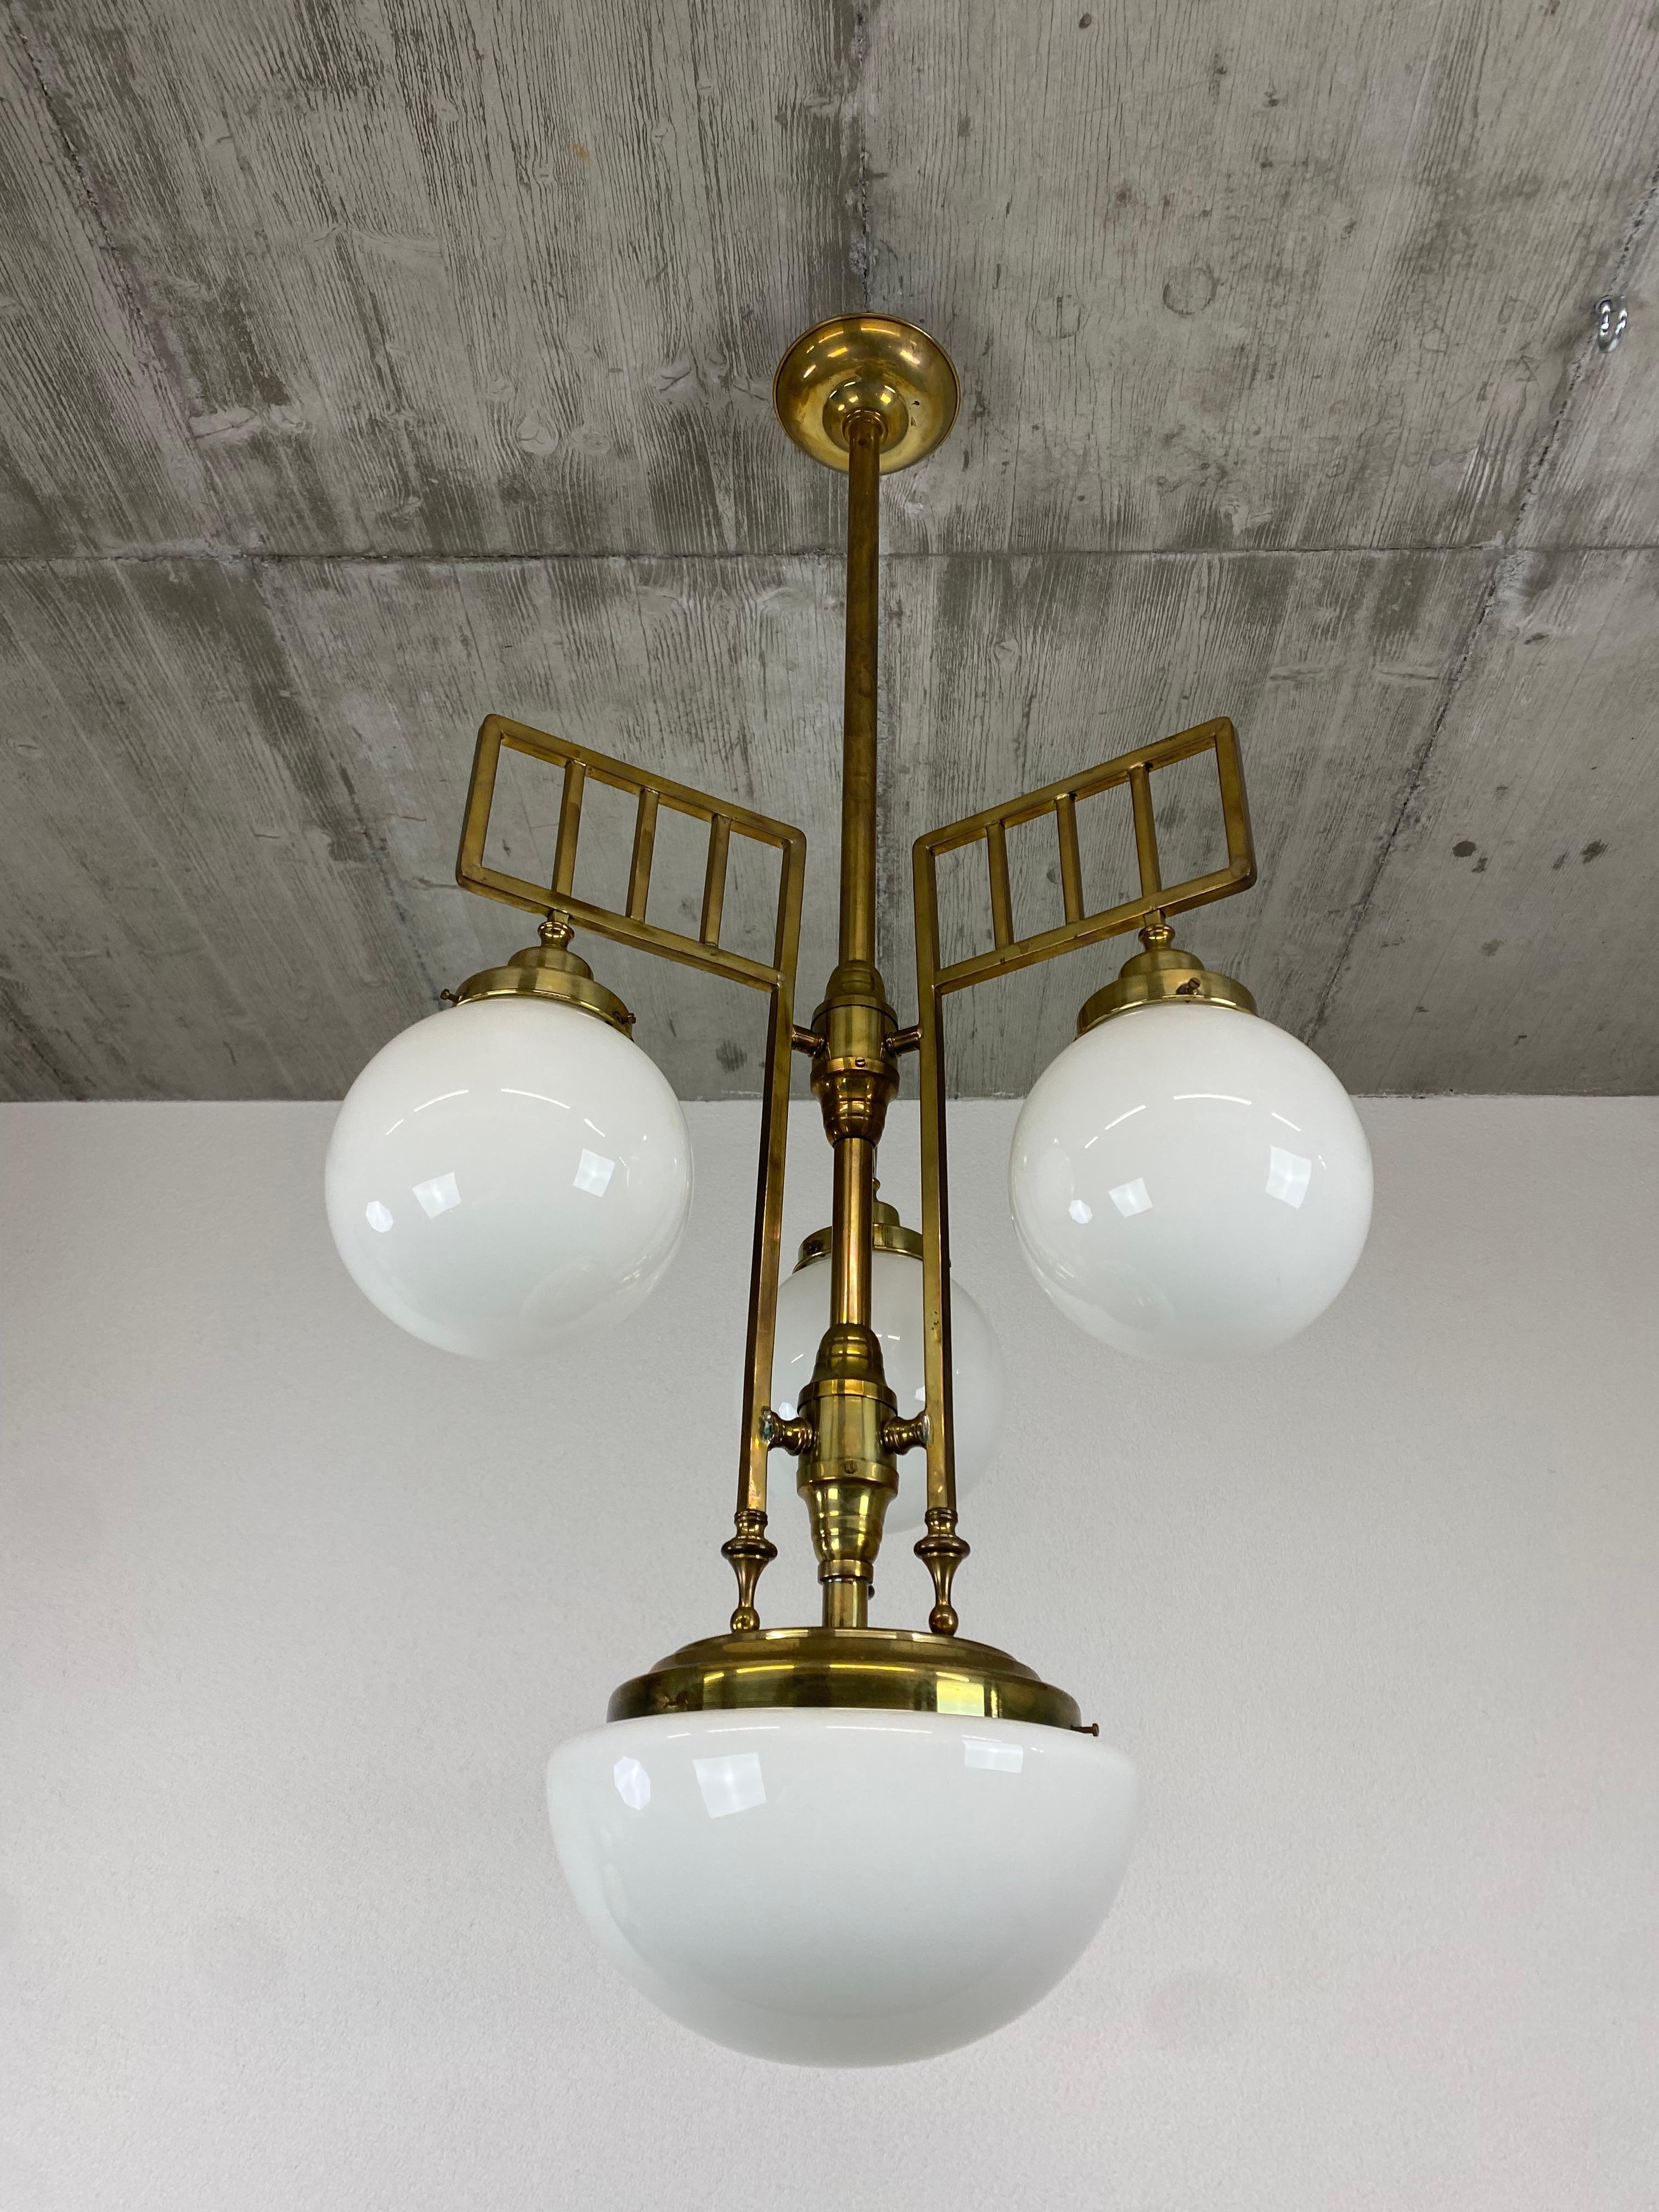 Large secession hanging lamp in excellent original condition.